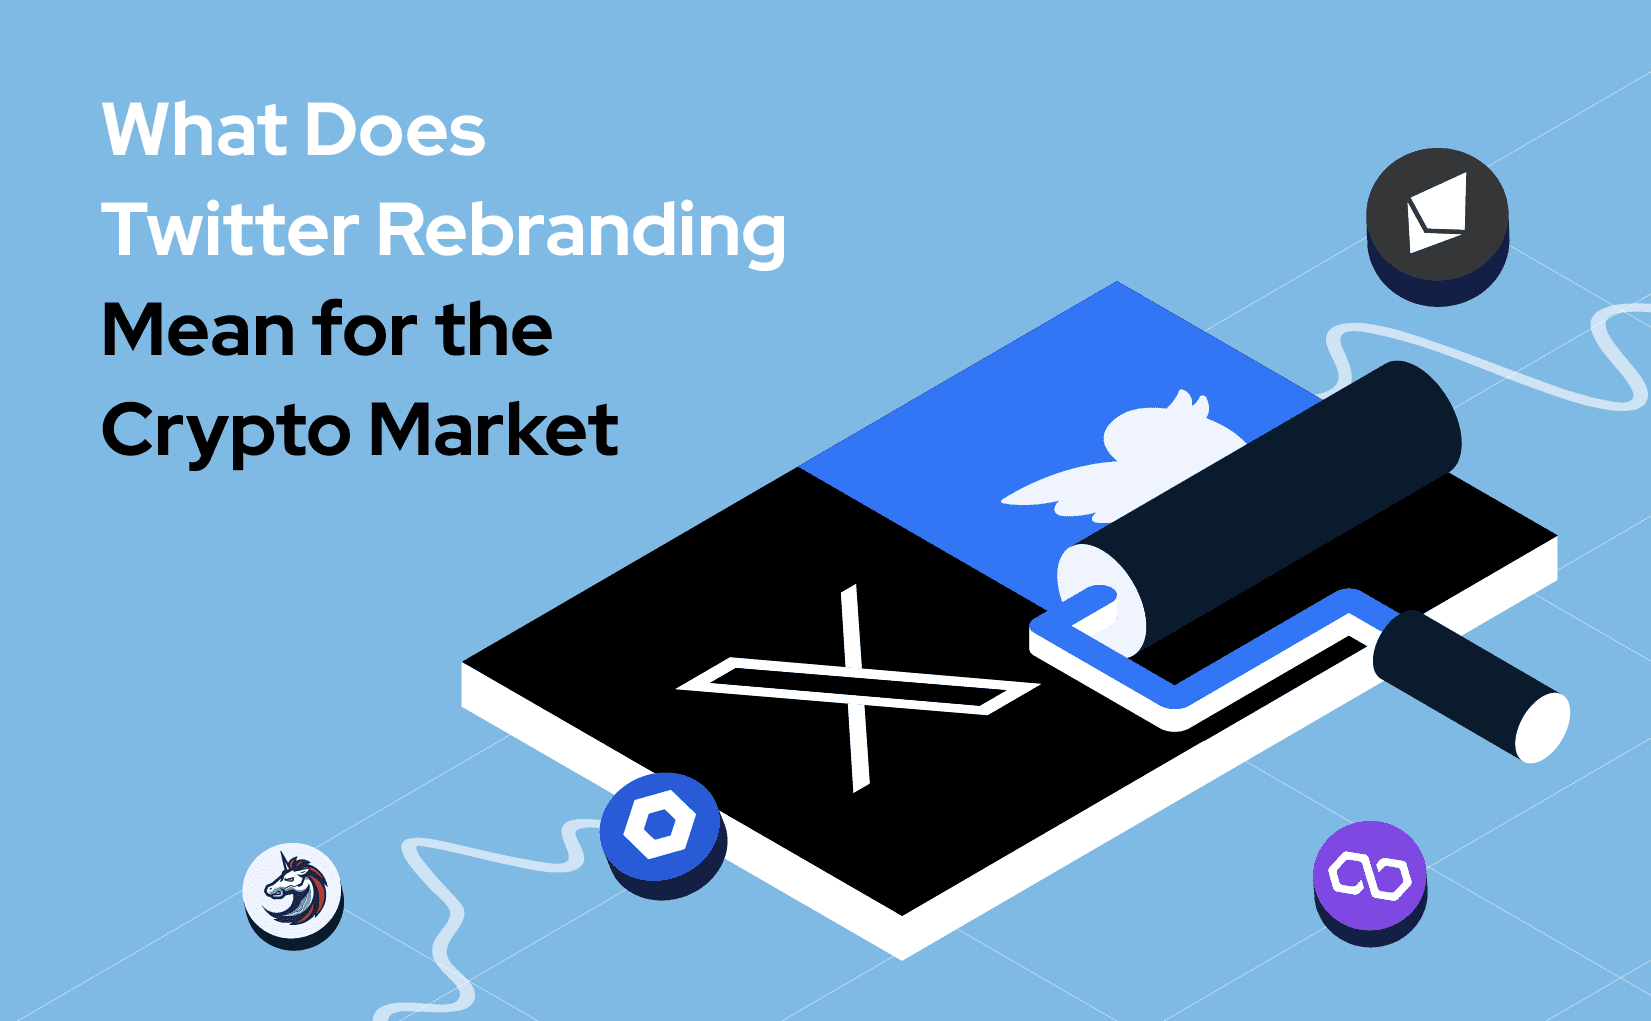 What Does Twitter Rebranding Mean for the Crypto Market